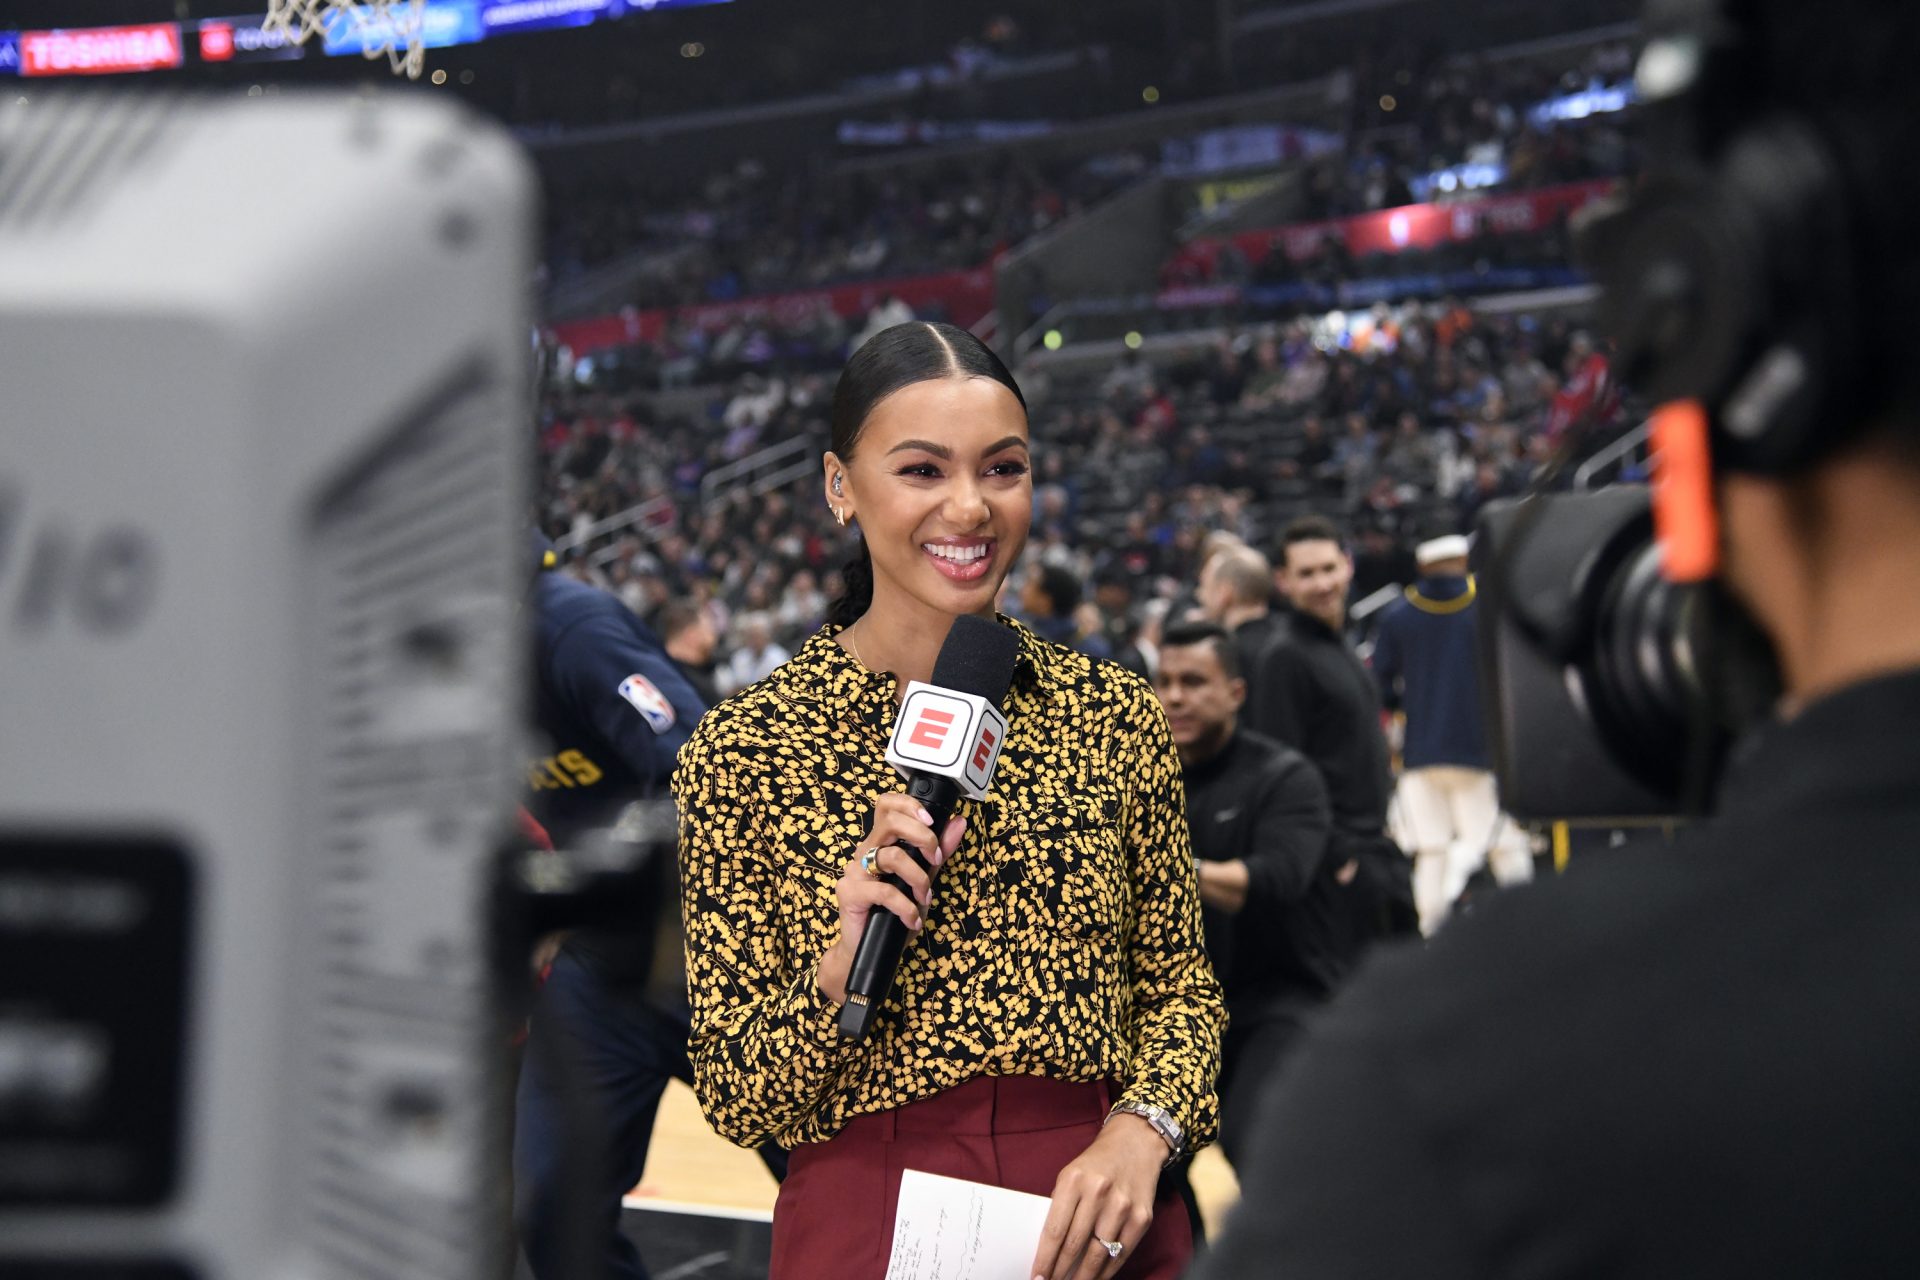 How Did Malika Andrews Rise To ESPN Broadcasting Prominence?